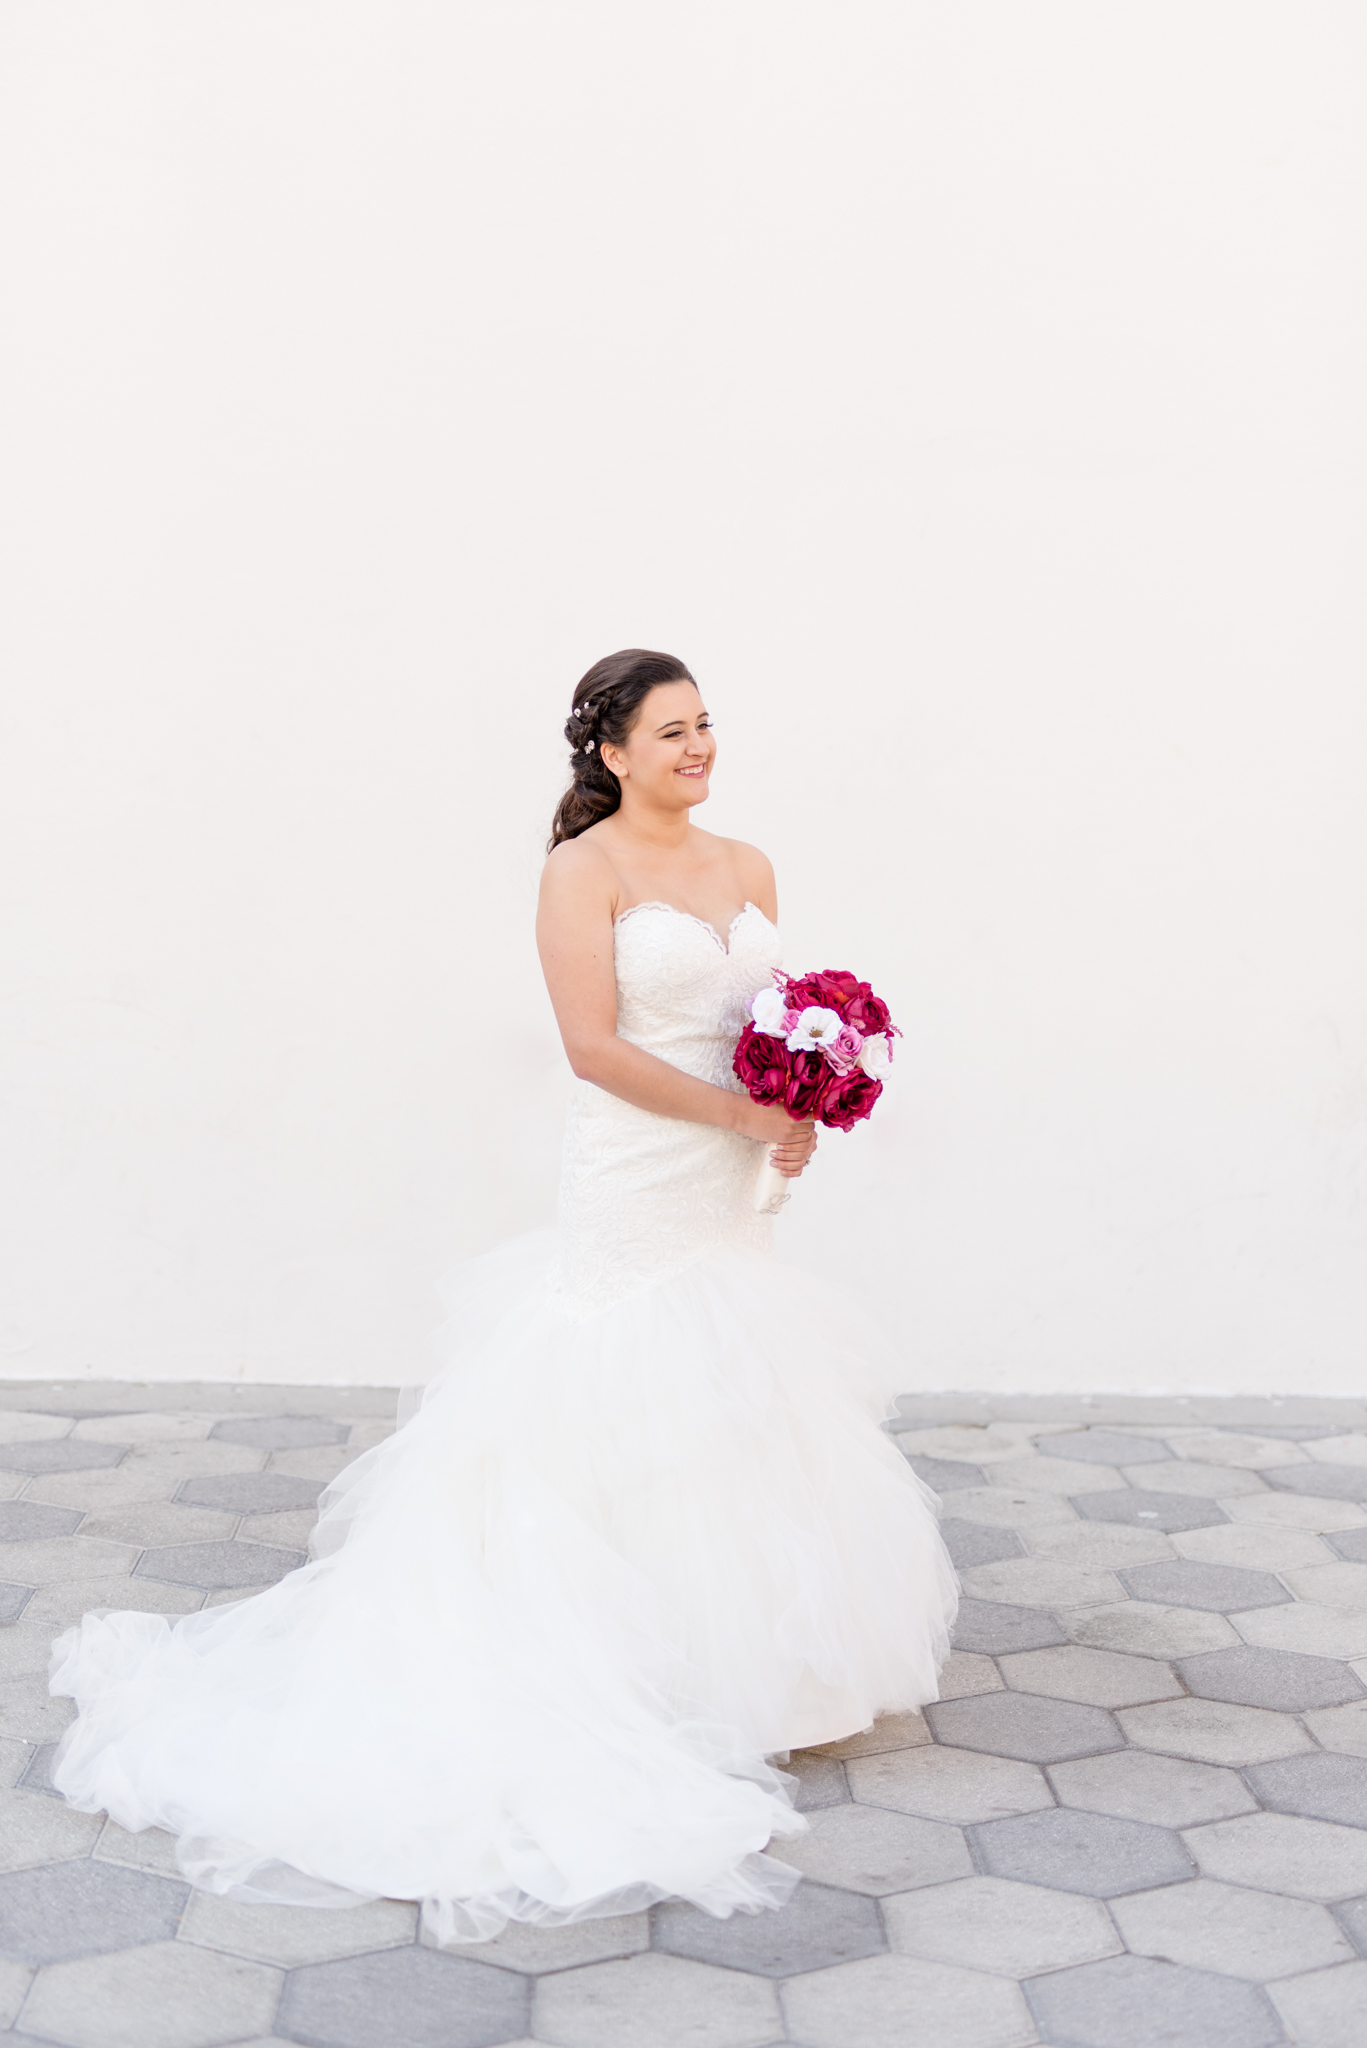 Bride smiles off camera in front of white wall.